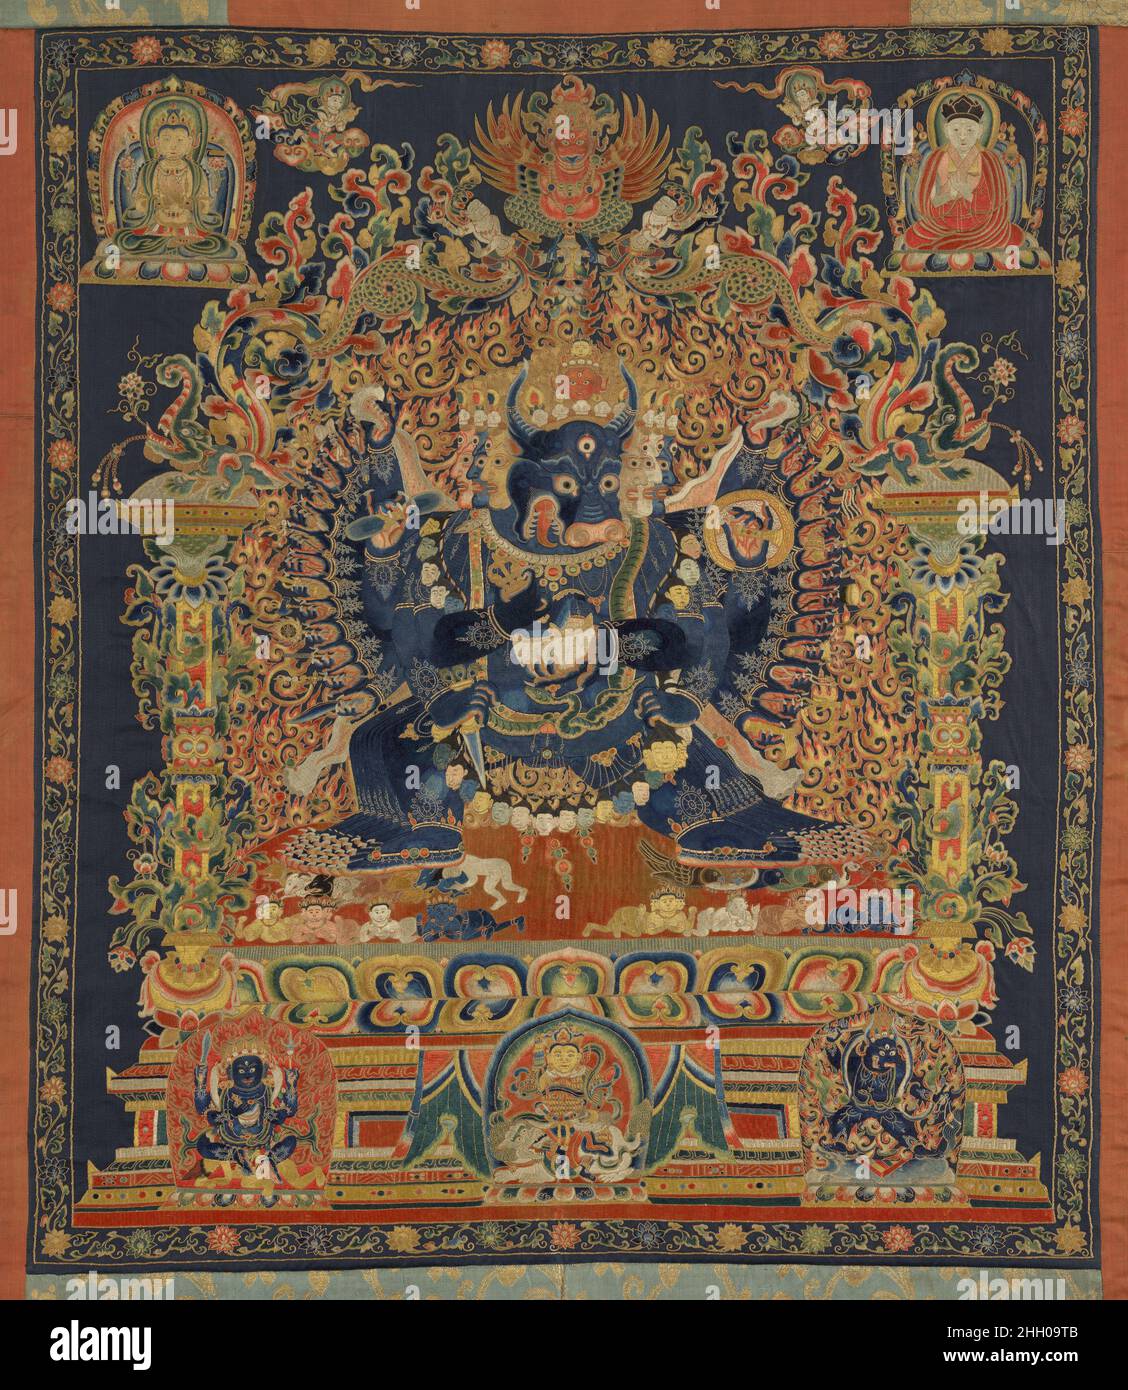 The Deity Vajrabhairava, Tantric Form of the Bodhisattva Manjushri early 15th century China The most popular tantric manifestation of Manjushri is Vajrabhairava. Here, he has a buffalo head, holds an array of weapons, and tramples on birds, dogs, and Hindu gods. In this form, he is sometimes called Yamantaka, or the defeater of death, a deity that ends the cycle of rebirth and provides a path to nirvana. He frightens away egotism and selfishness—the root of suffering—and in this true form reveals the awesome and terrifying nature of enlightenment. For this extraordinary embroidery, the artist Stock Photo